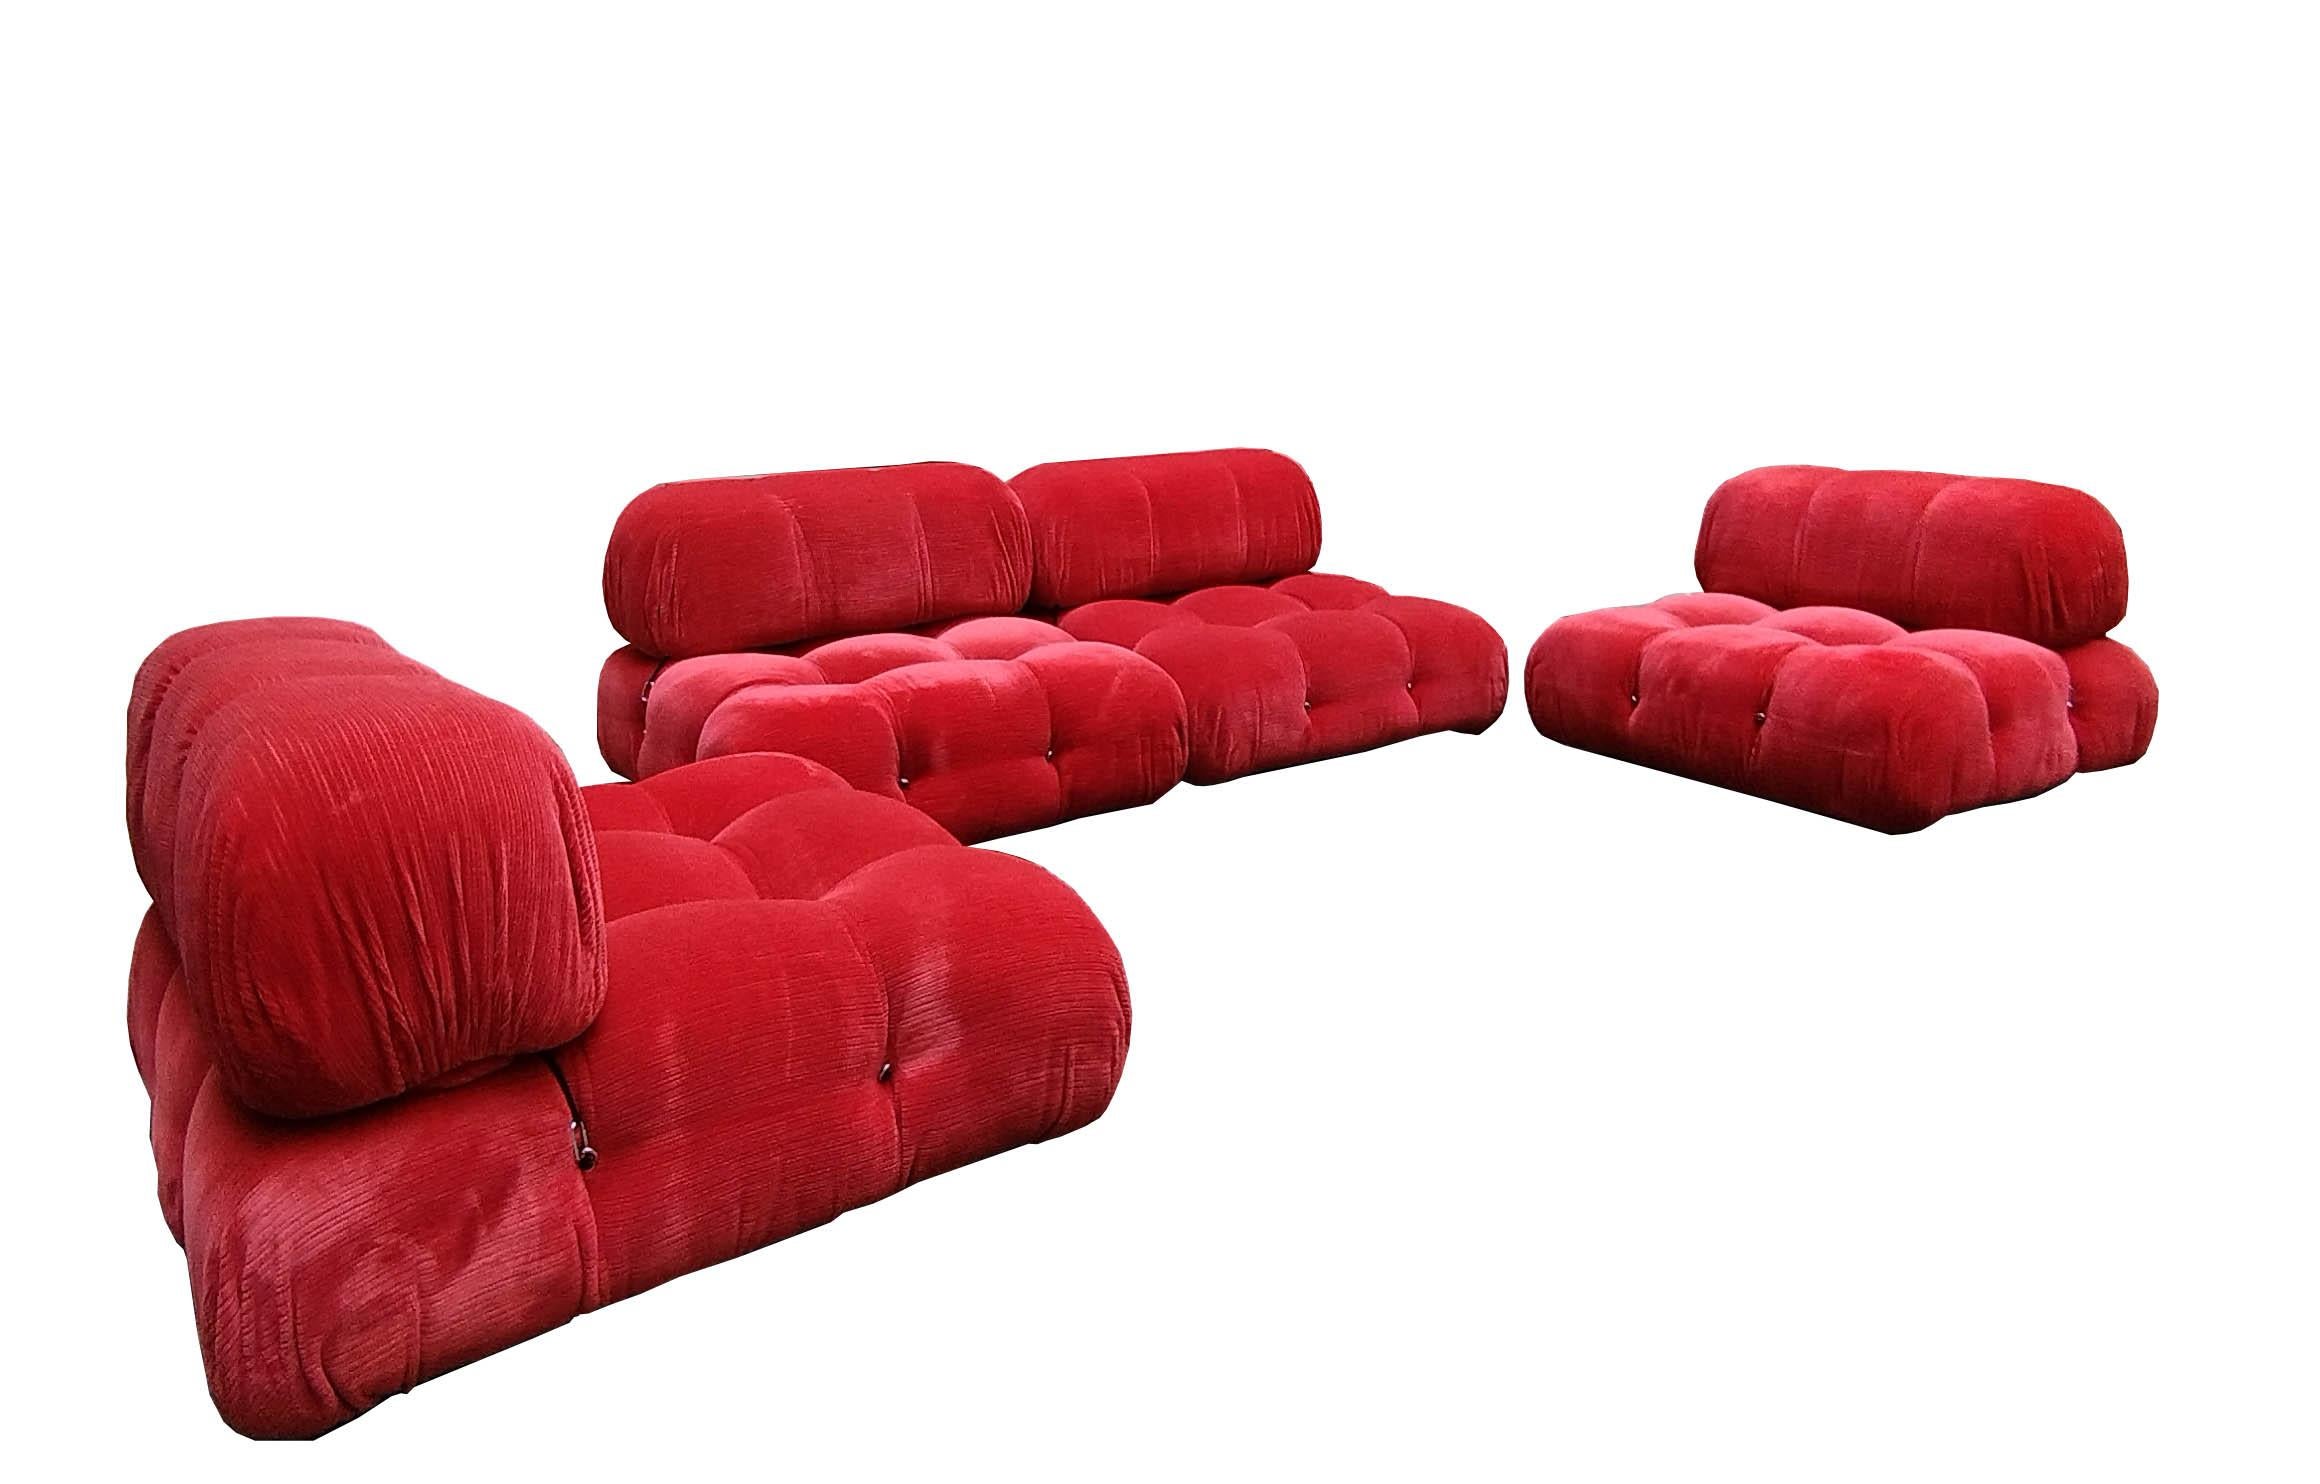 Mario Bellini, large modular sofa 'Cameleonda', red fabric covering, Italy, designed in 1971

The modular elements of this sofa can be used freely and separately from each other. The backrests and armrests are fitted with rings and snap hooks,